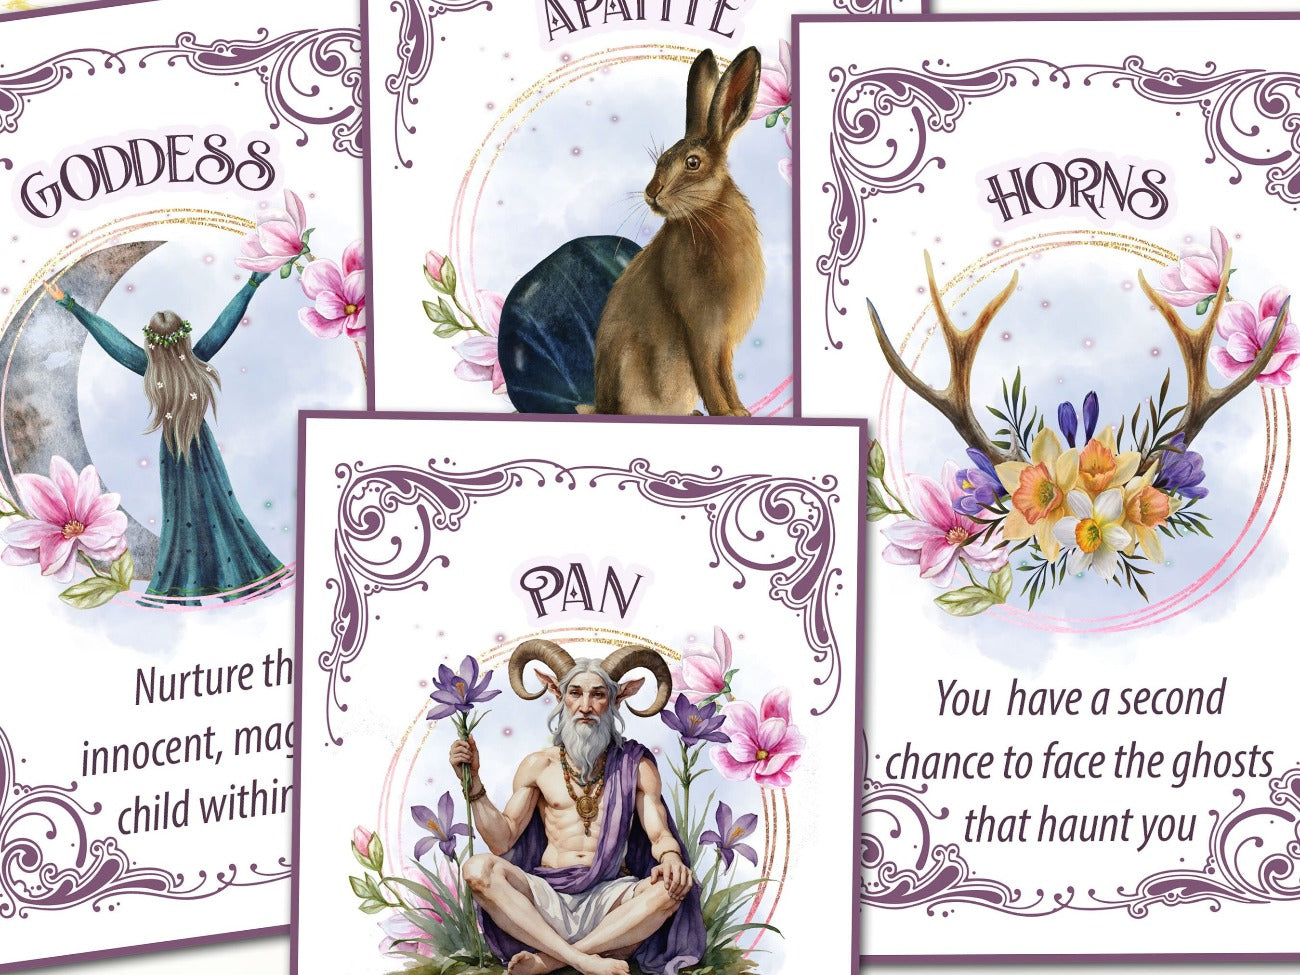 OSTARA ORACLE CARDS, Closeup view of cards with pale pink background, purple ornate scroll borders, golden circle with Ostara art and oracle text - Morgana Magick Spell